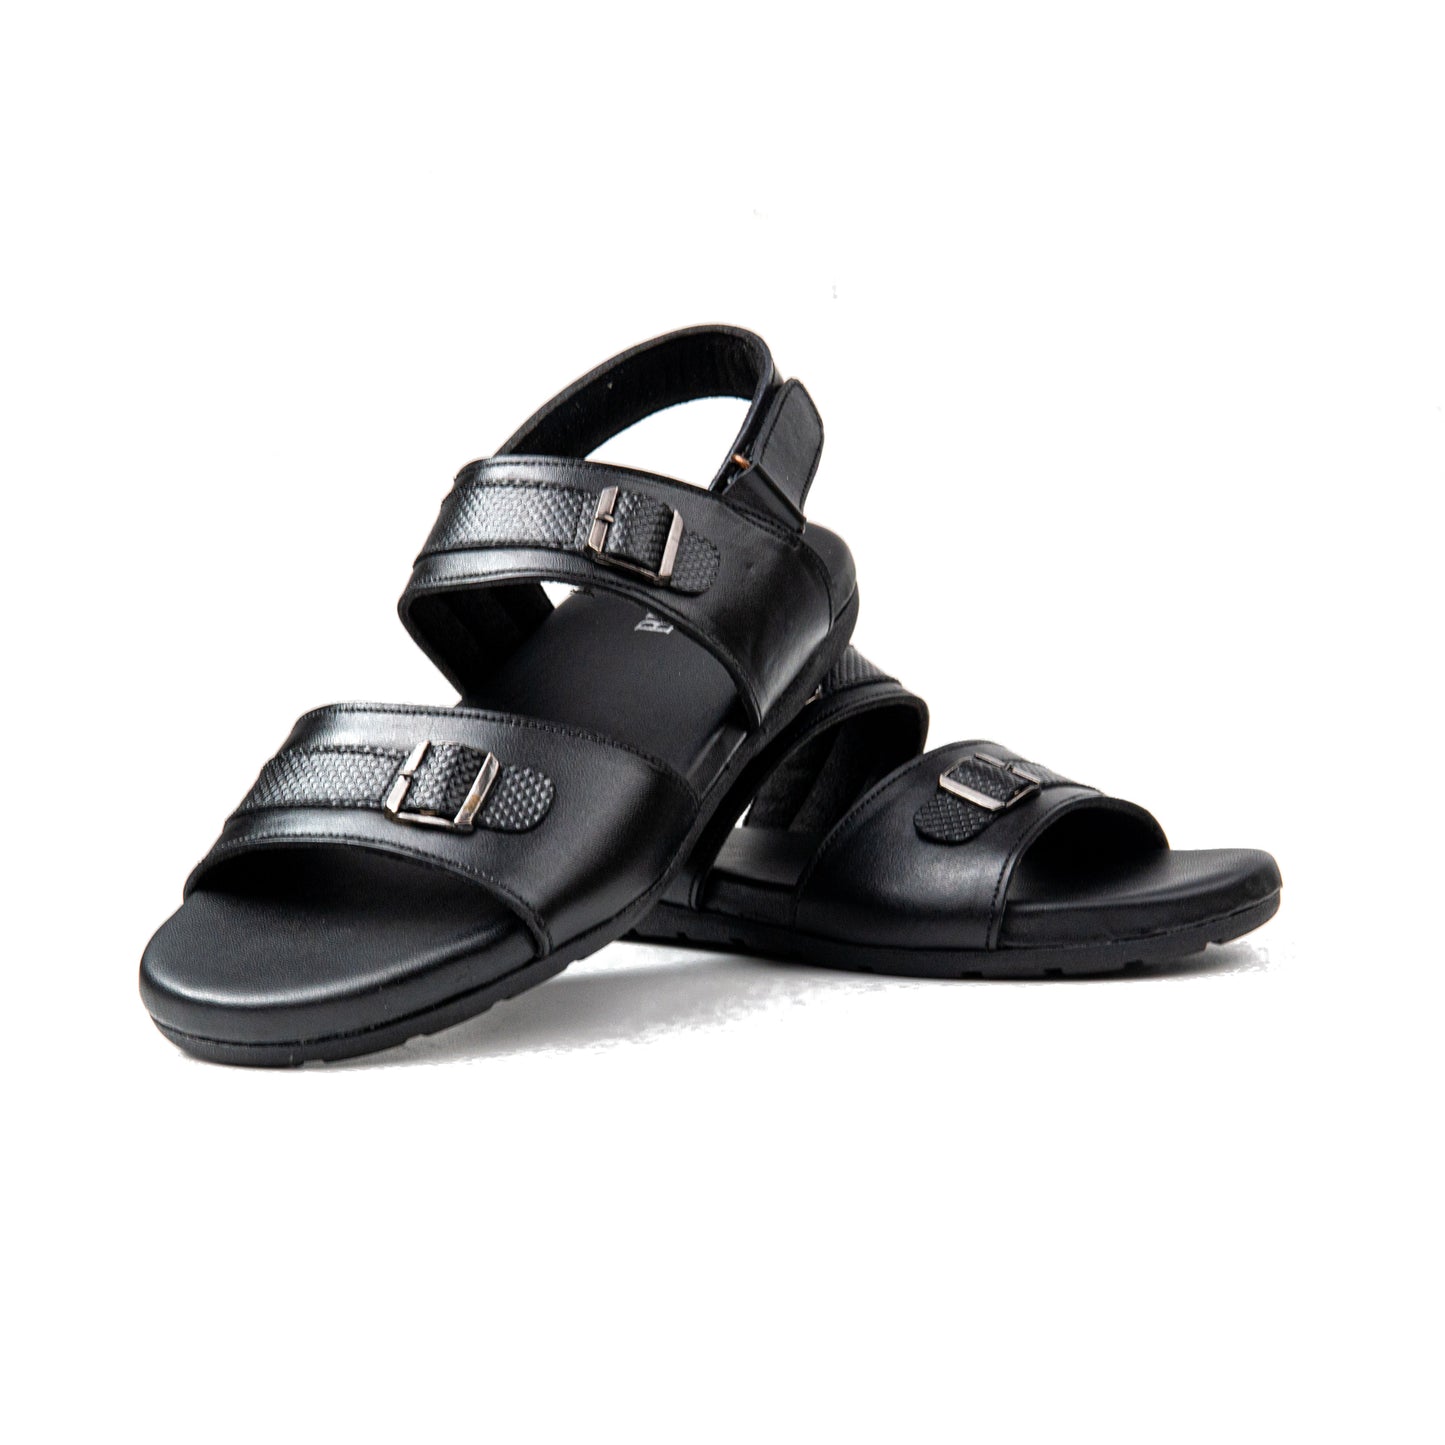 Dual Buckled Leather Sandals